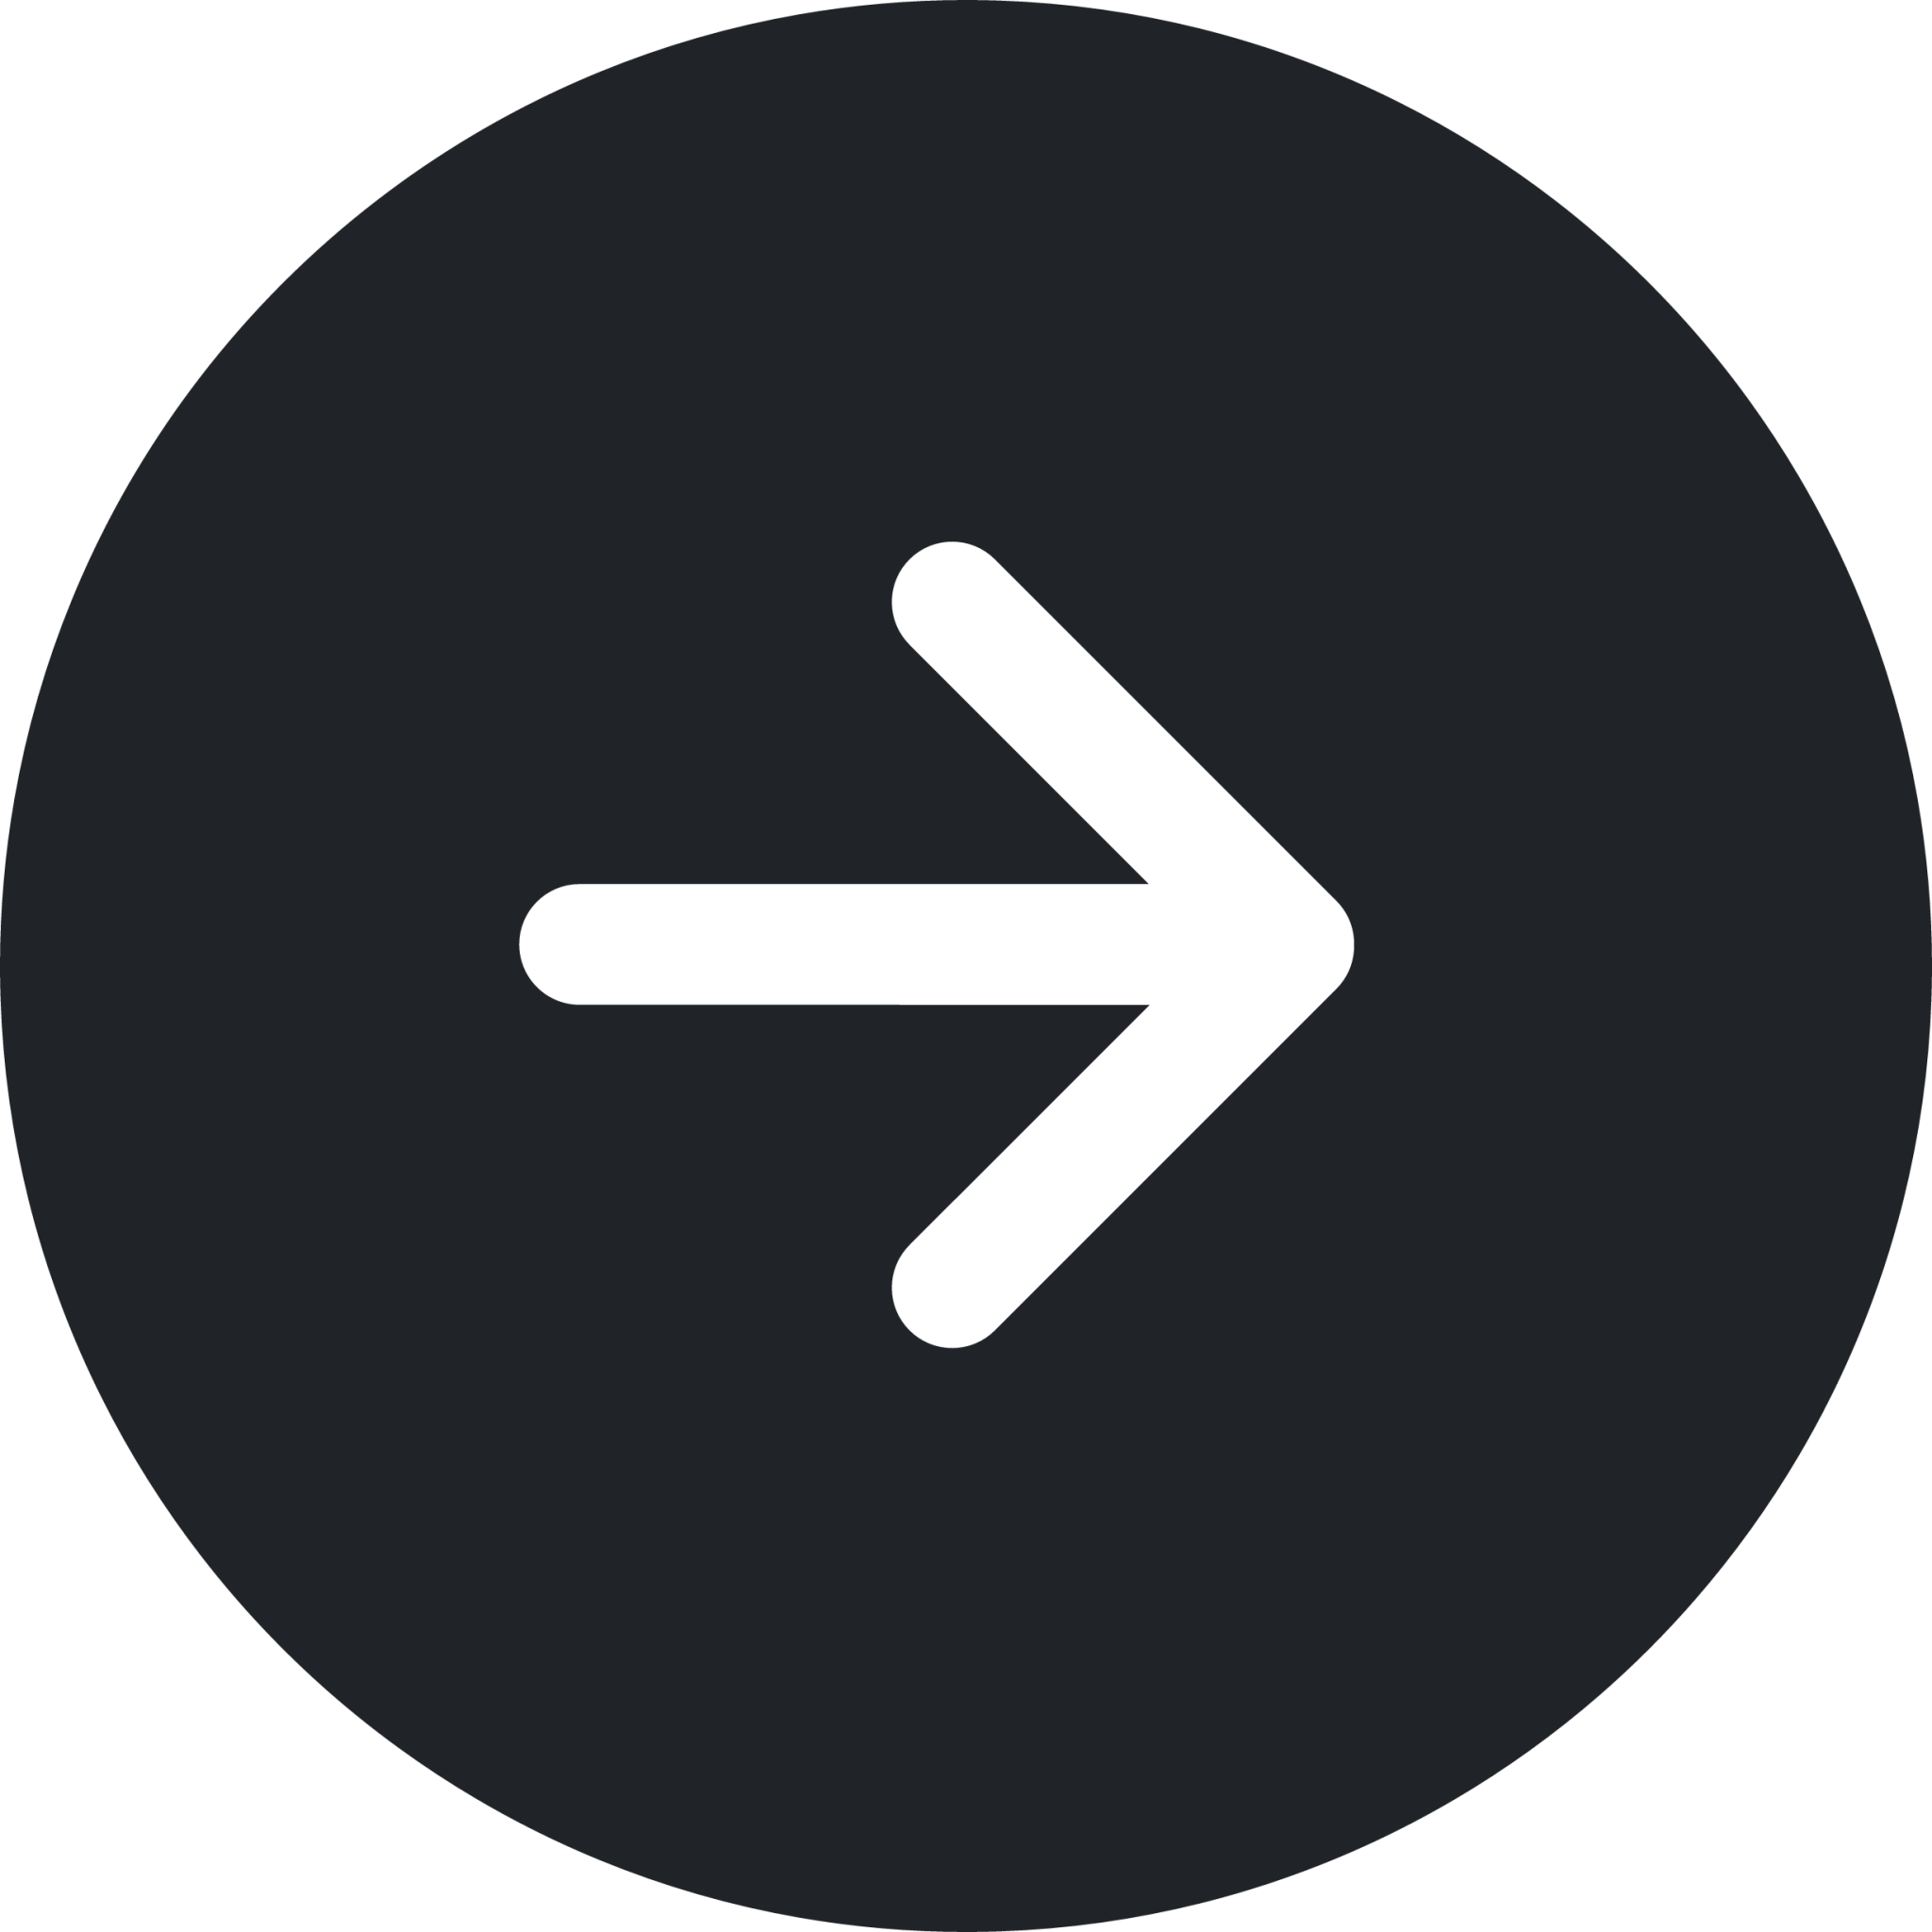 toright (rounded filled) icon